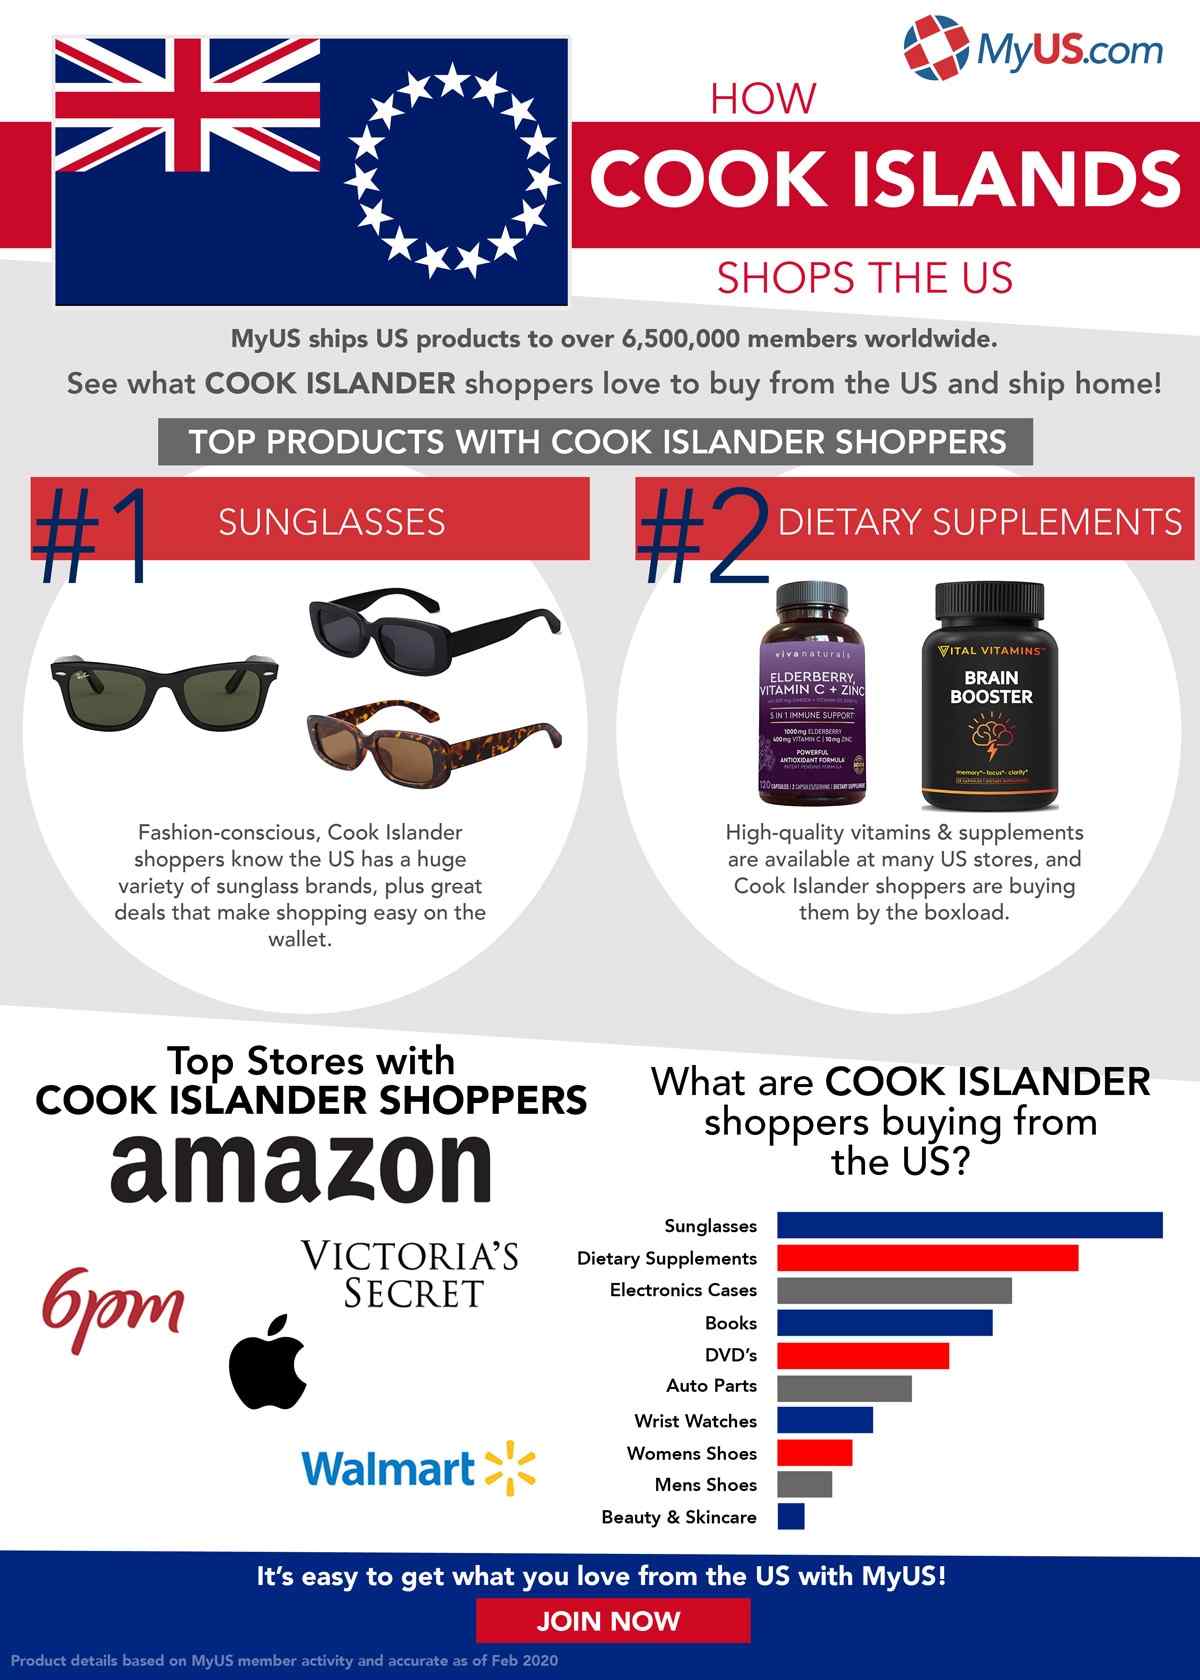 How the Cook Islands Shops Infographic